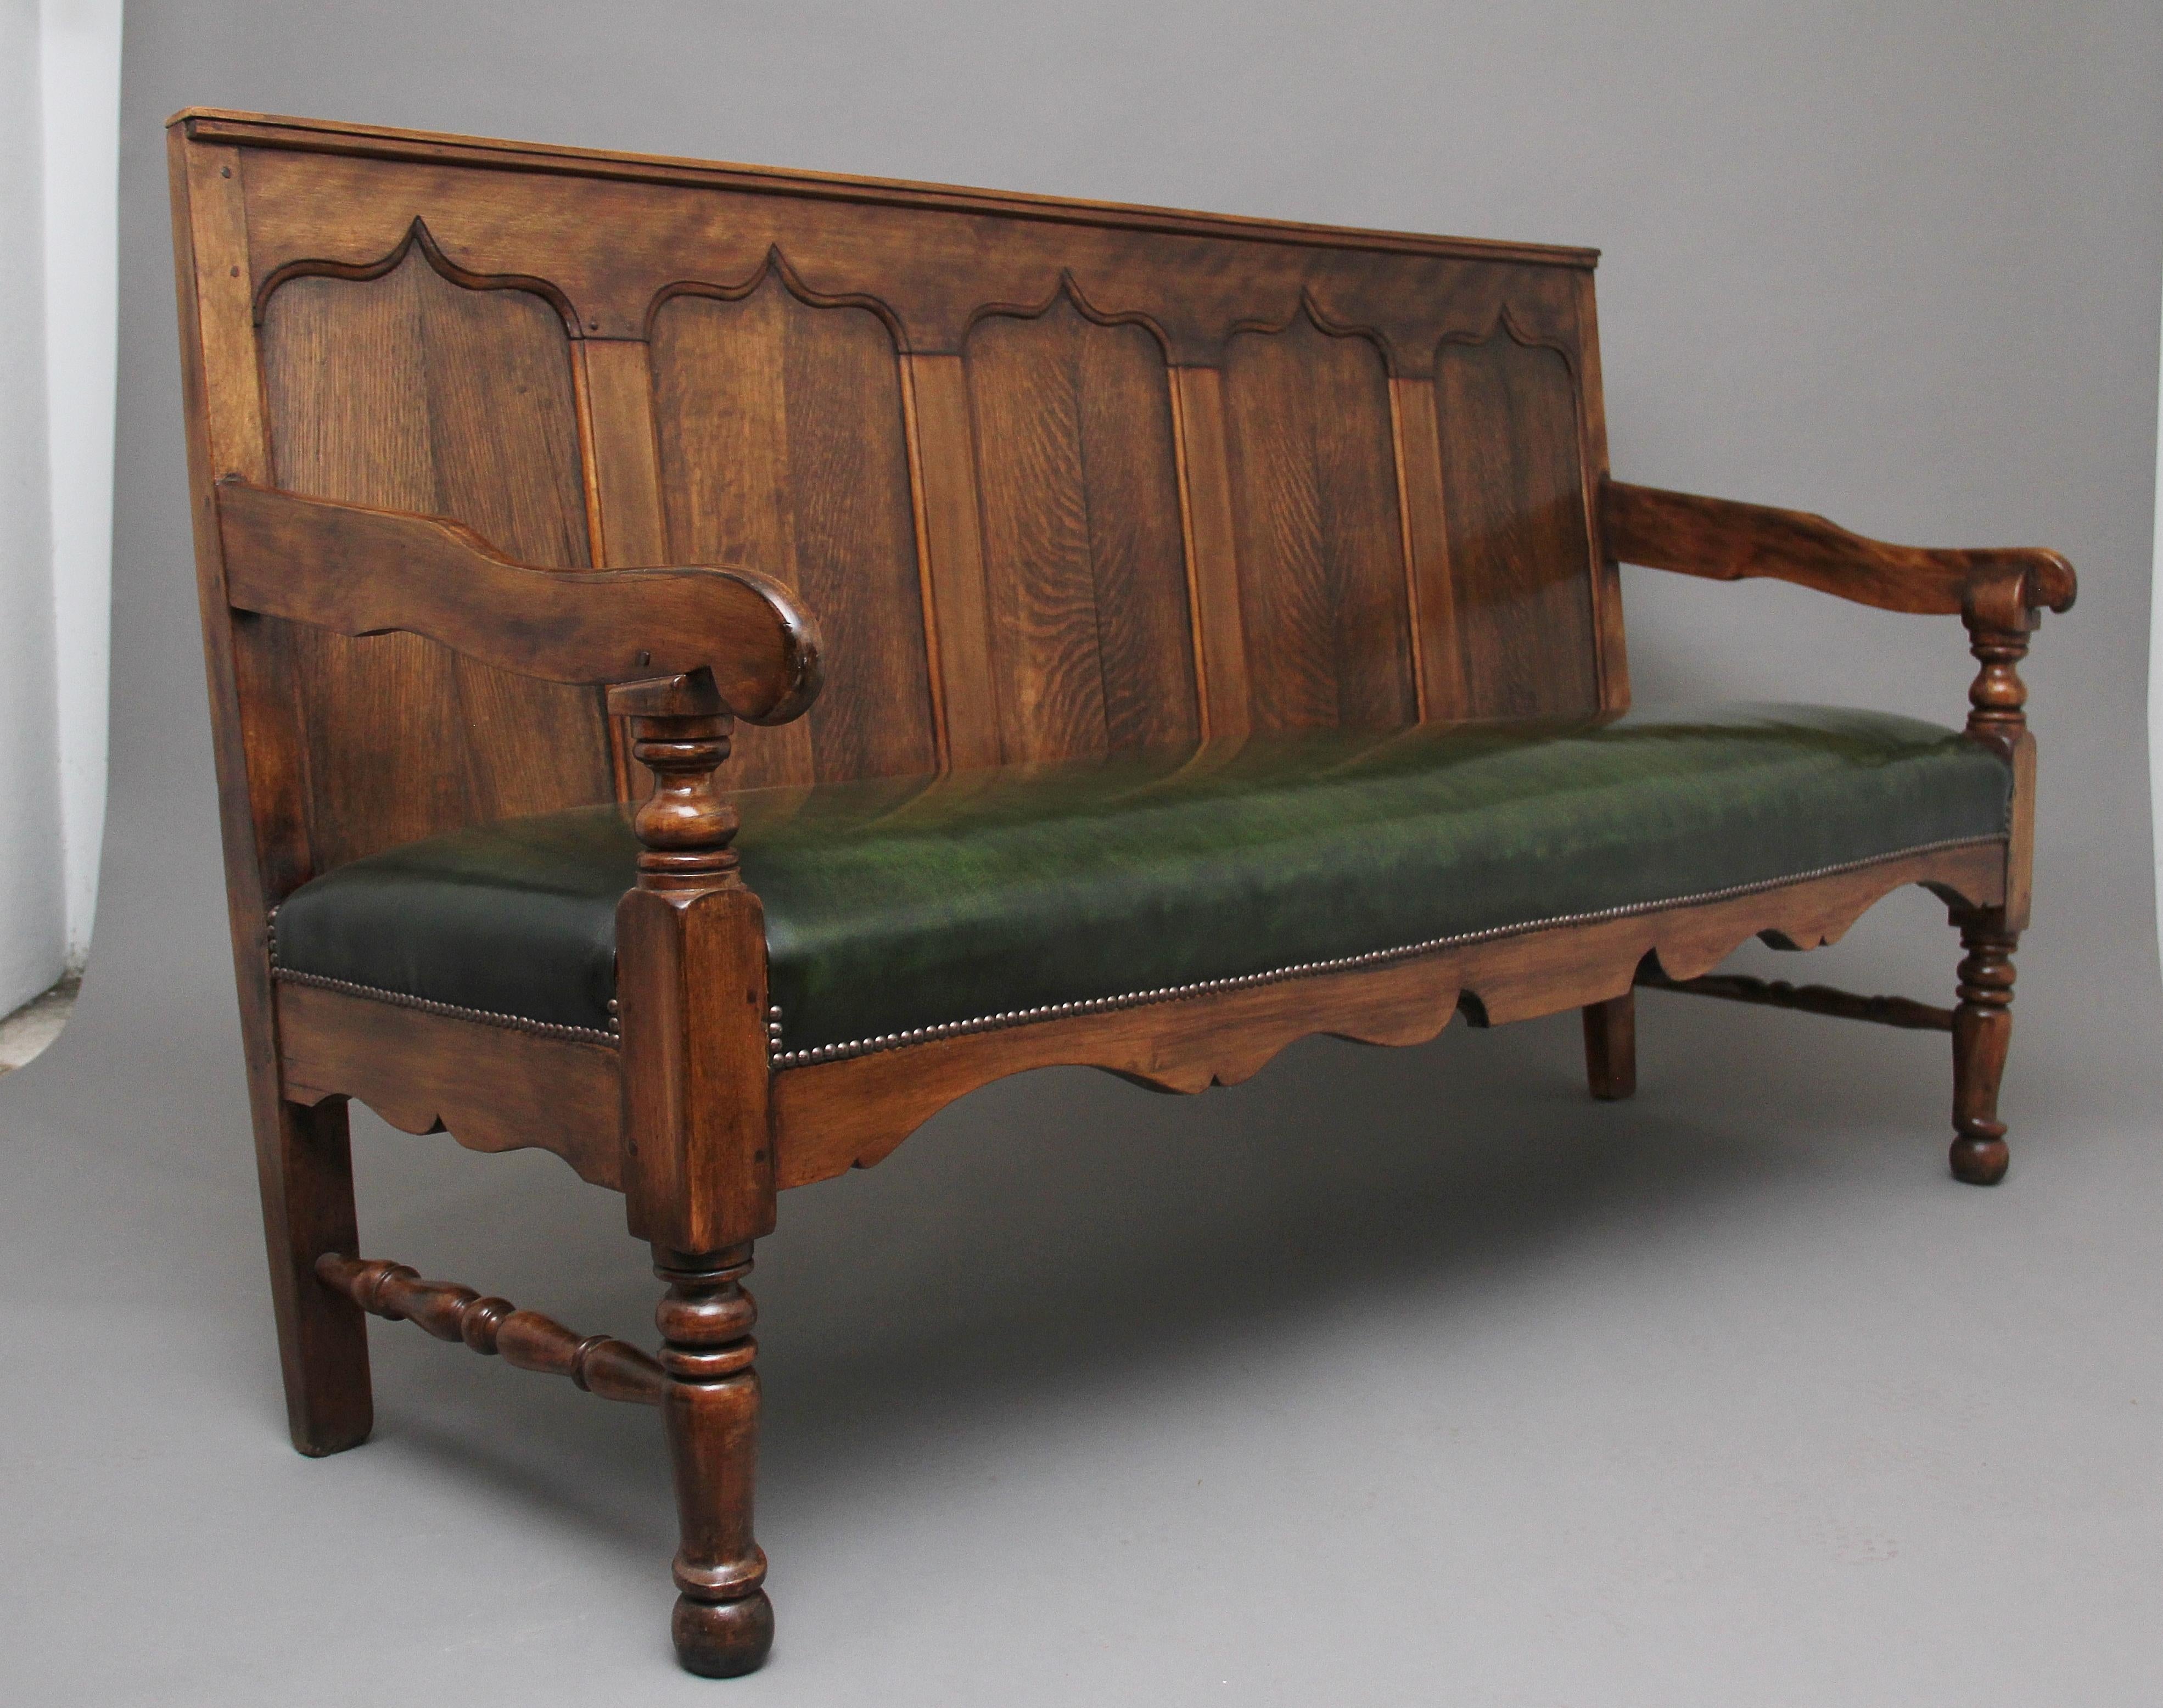 18th century oak and fruitwood bench or settle, the high back with five fielded oak panels flanked by down swept arms on turned supports enclosing the recently upholstered green leather seat with brass stud decoration, nice shaped apron below,